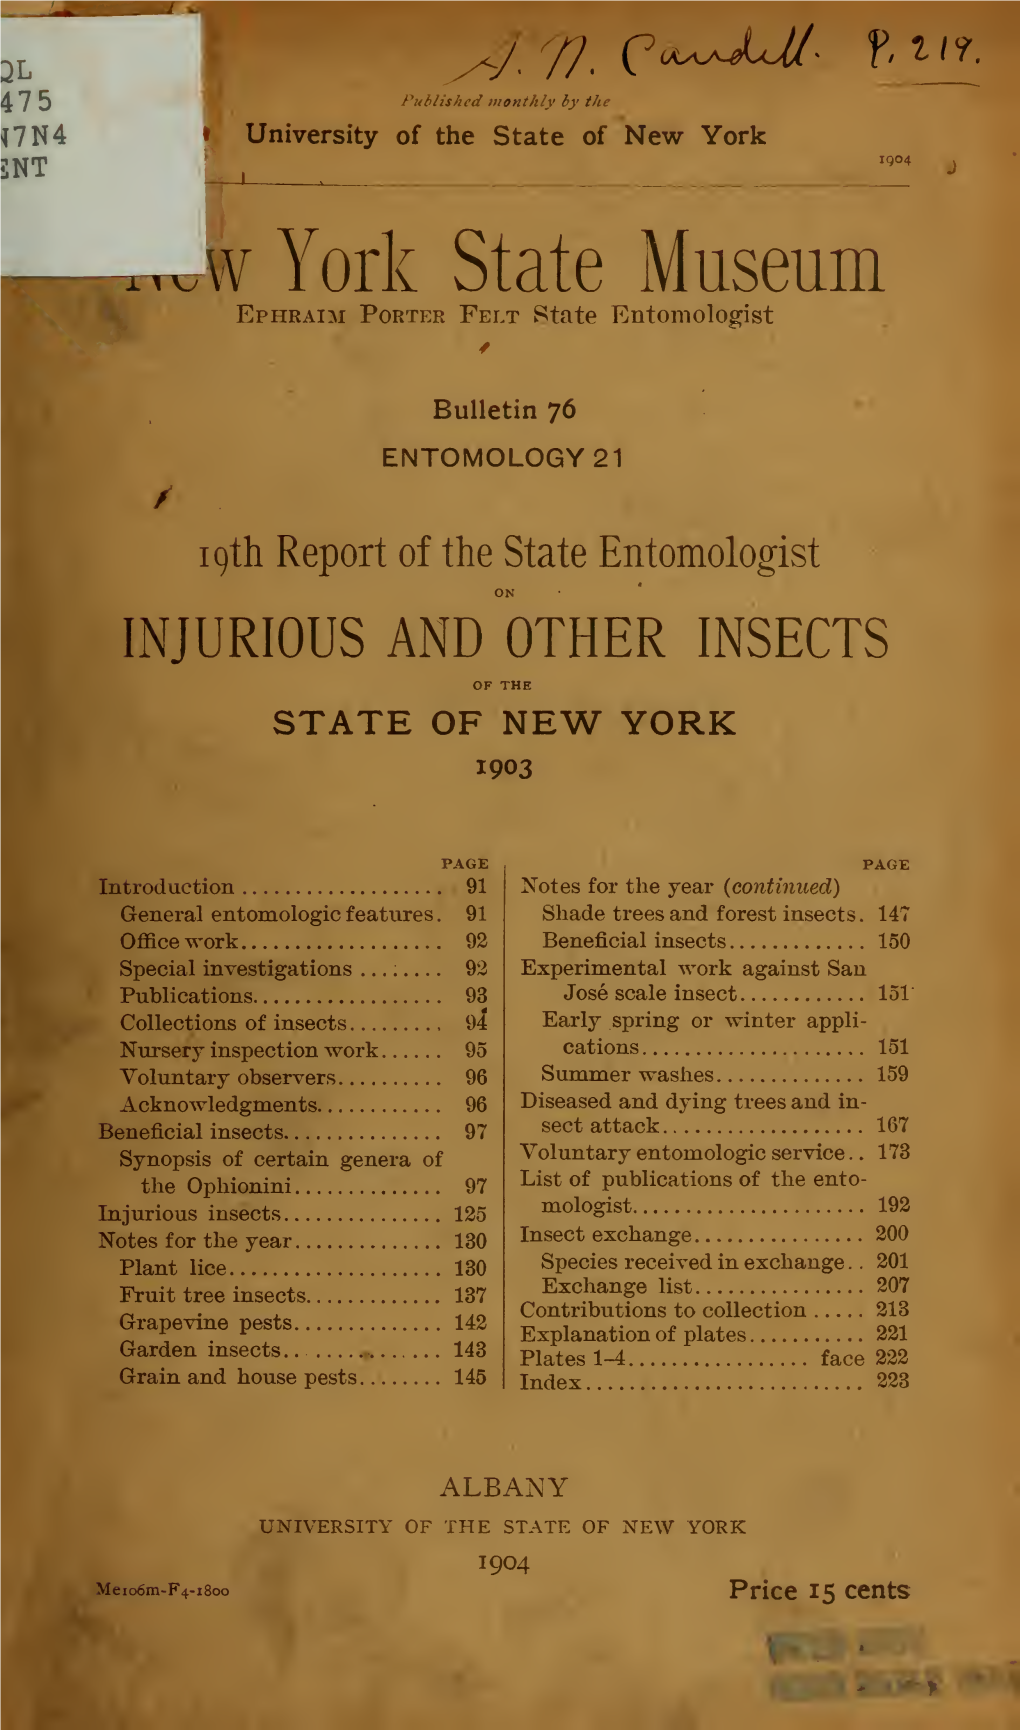 Report of the State Entomologist on Injurious and Other Insects of The